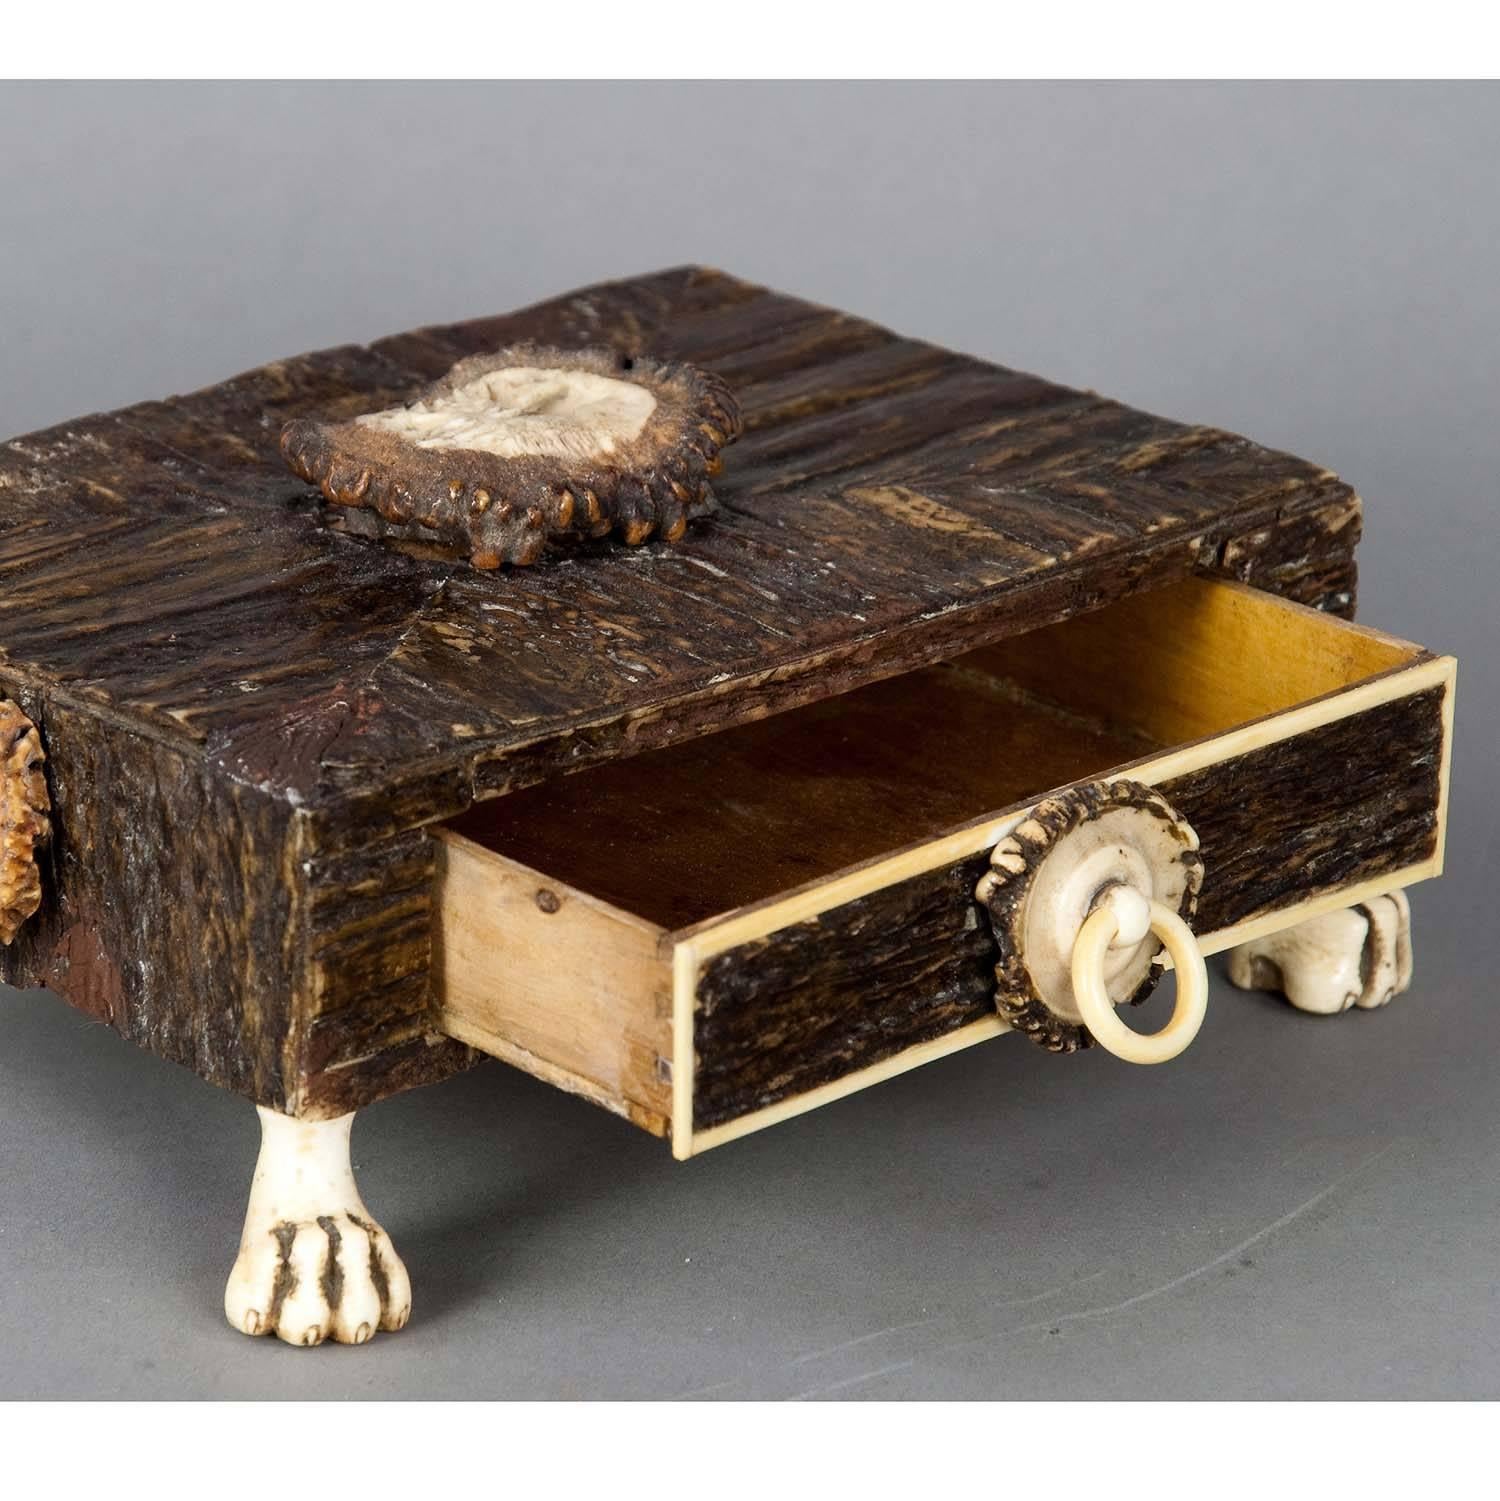 A marvelous drawer casket. Made of wood, veneered with horn pieces. Sides decorated with horn roses, on top a carved horn rose. Feet made of horn, carved in the shape of lions paws. Executed circa 1860. (veneer partly restored)

Measure: width